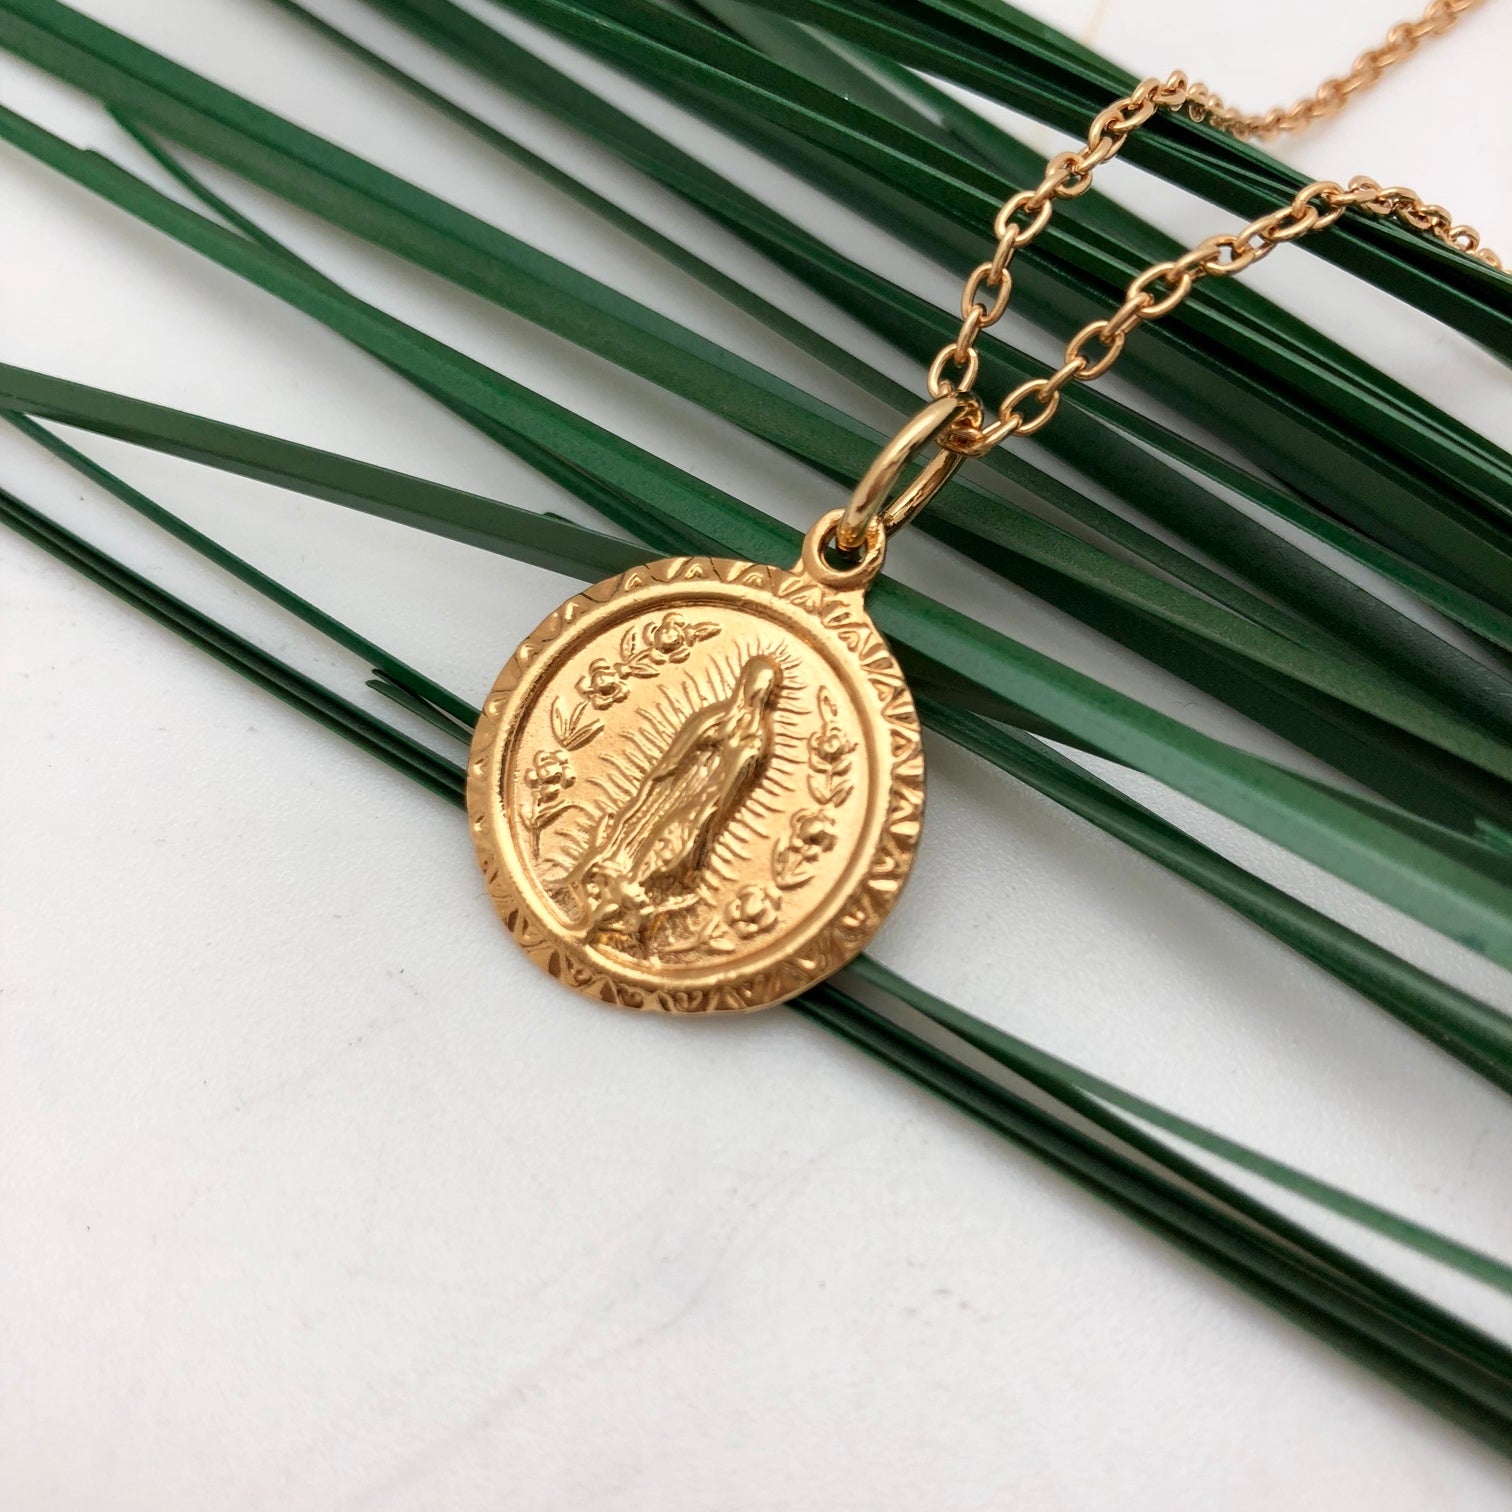 Mary Medal - Mirabelle Jewellery